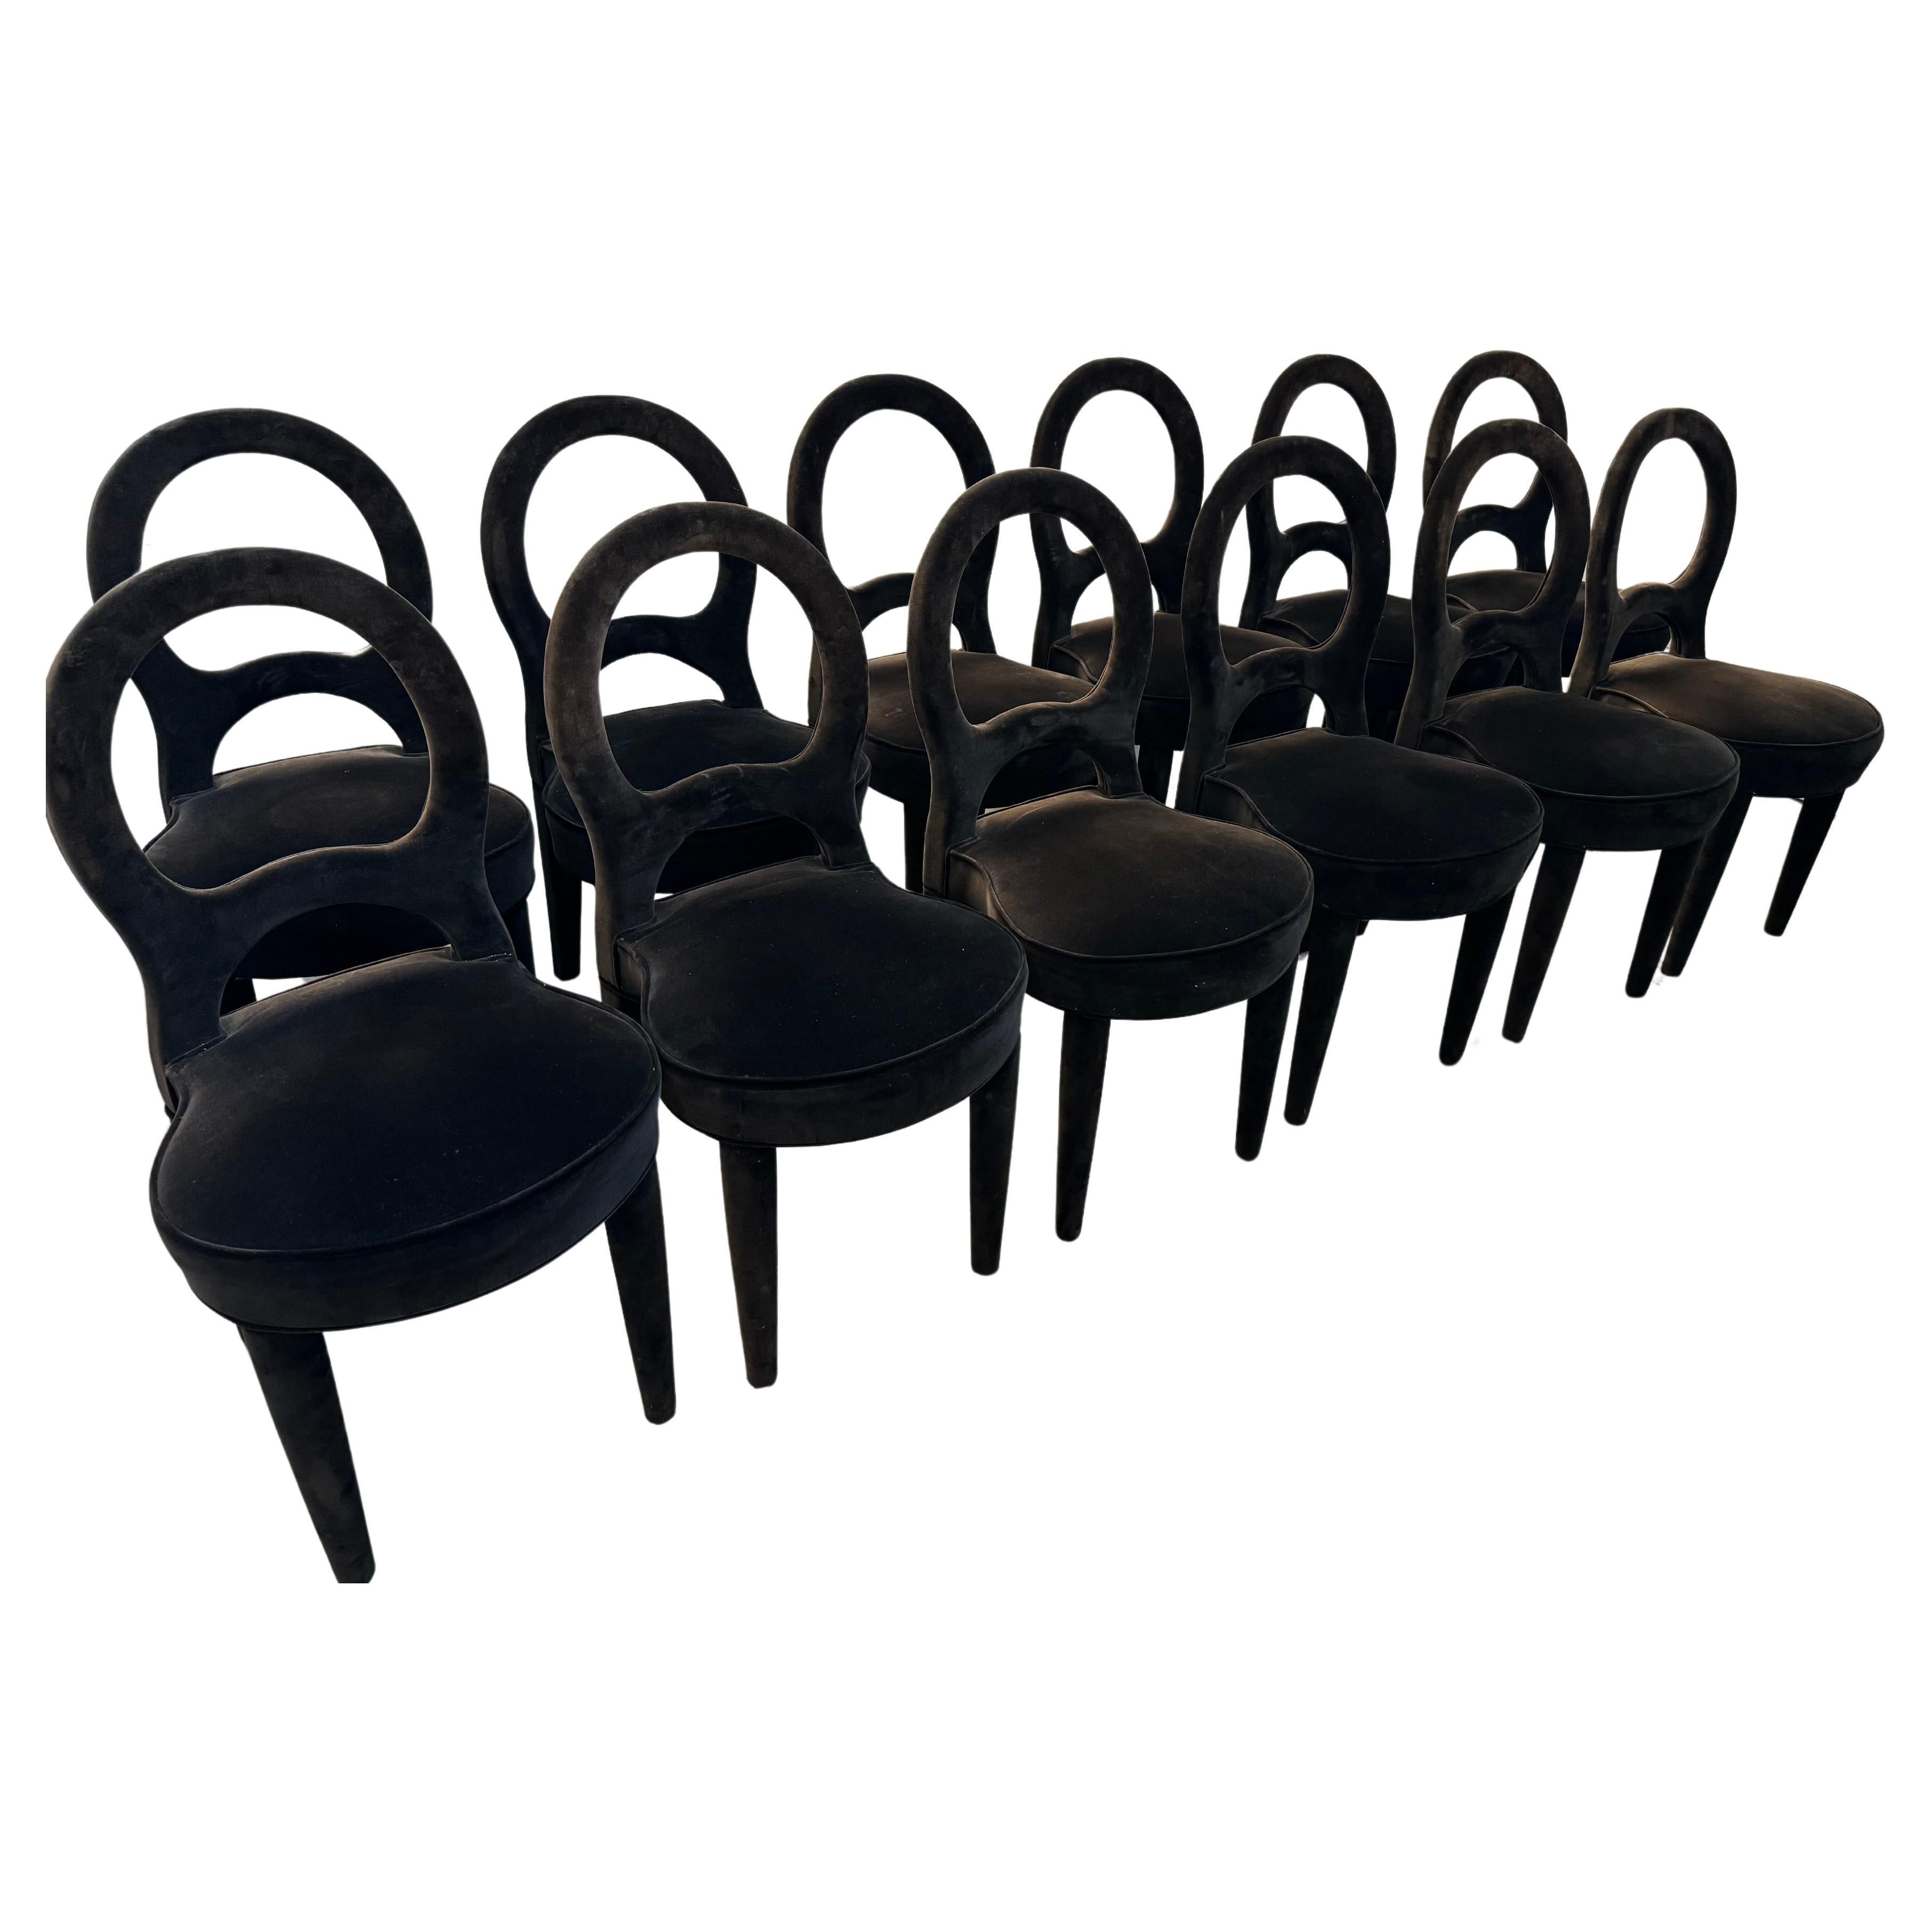 Set of 12 "Bilou Bilou" chairs by Promemoria, Italy, circa 2000 For Sale